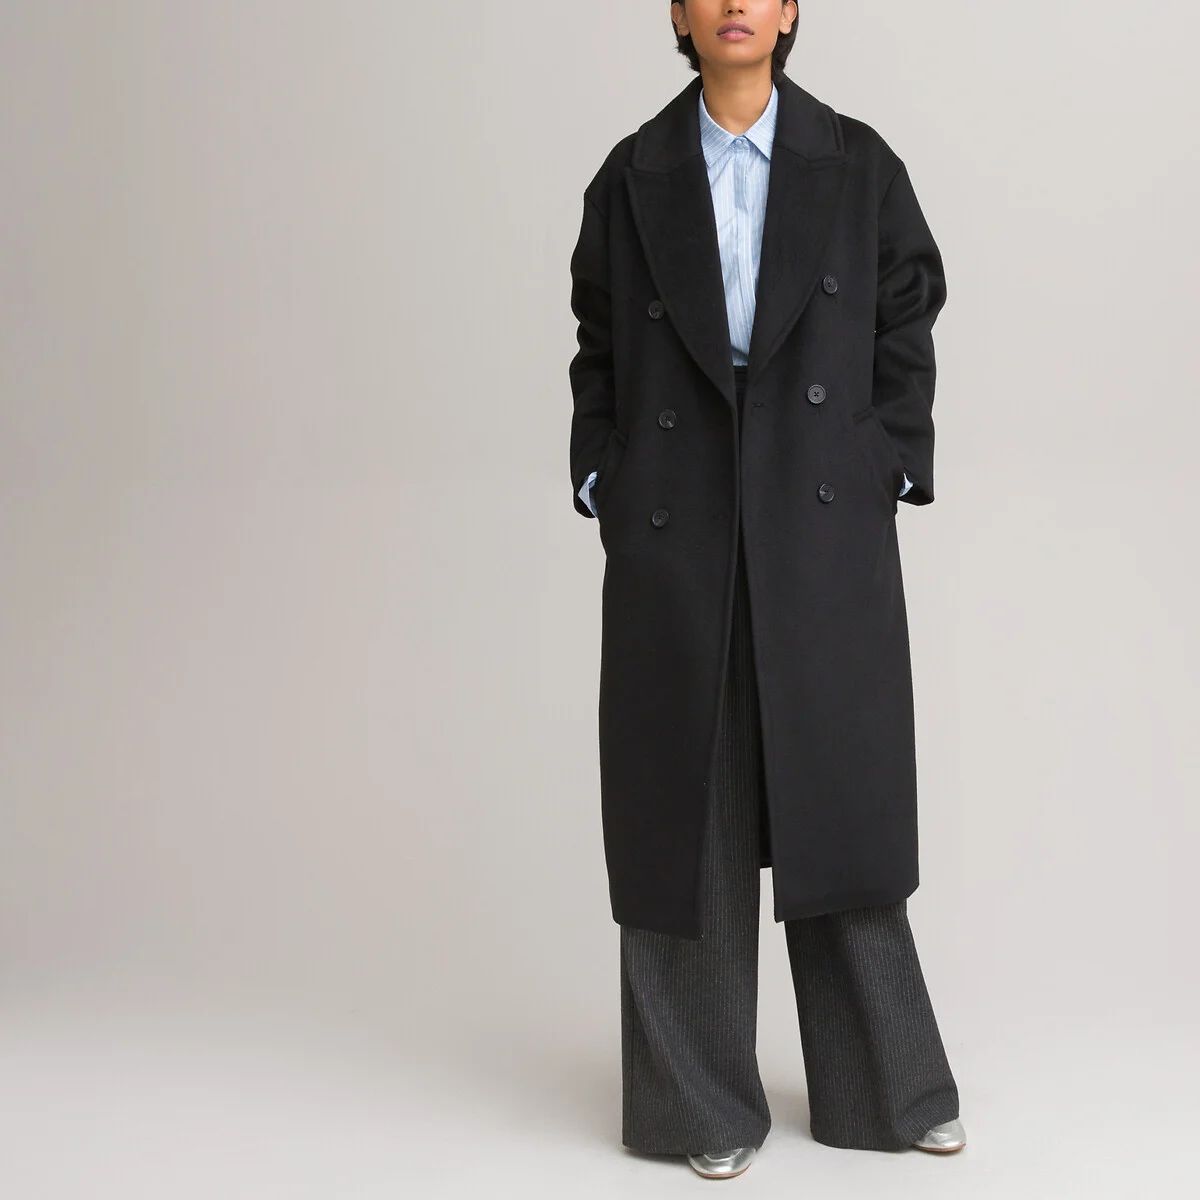 Recycled Wool Mix Coat with Button Fastening | La Redoute (UK)